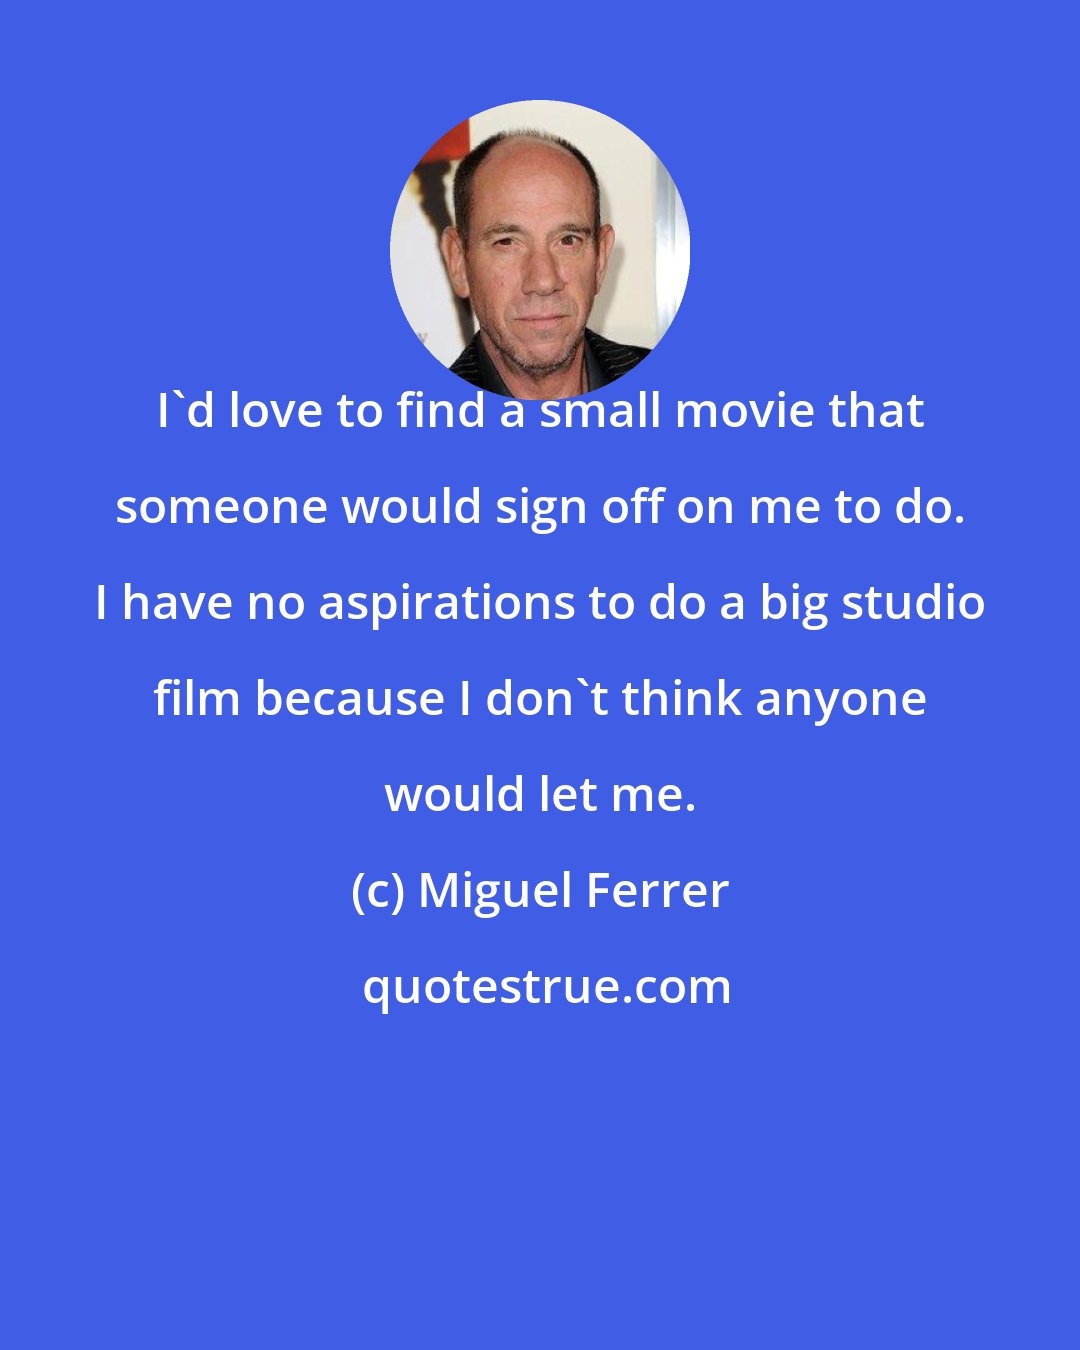 Miguel Ferrer: I'd love to find a small movie that someone would sign off on me to do. I have no aspirations to do a big studio film because I don't think anyone would let me.